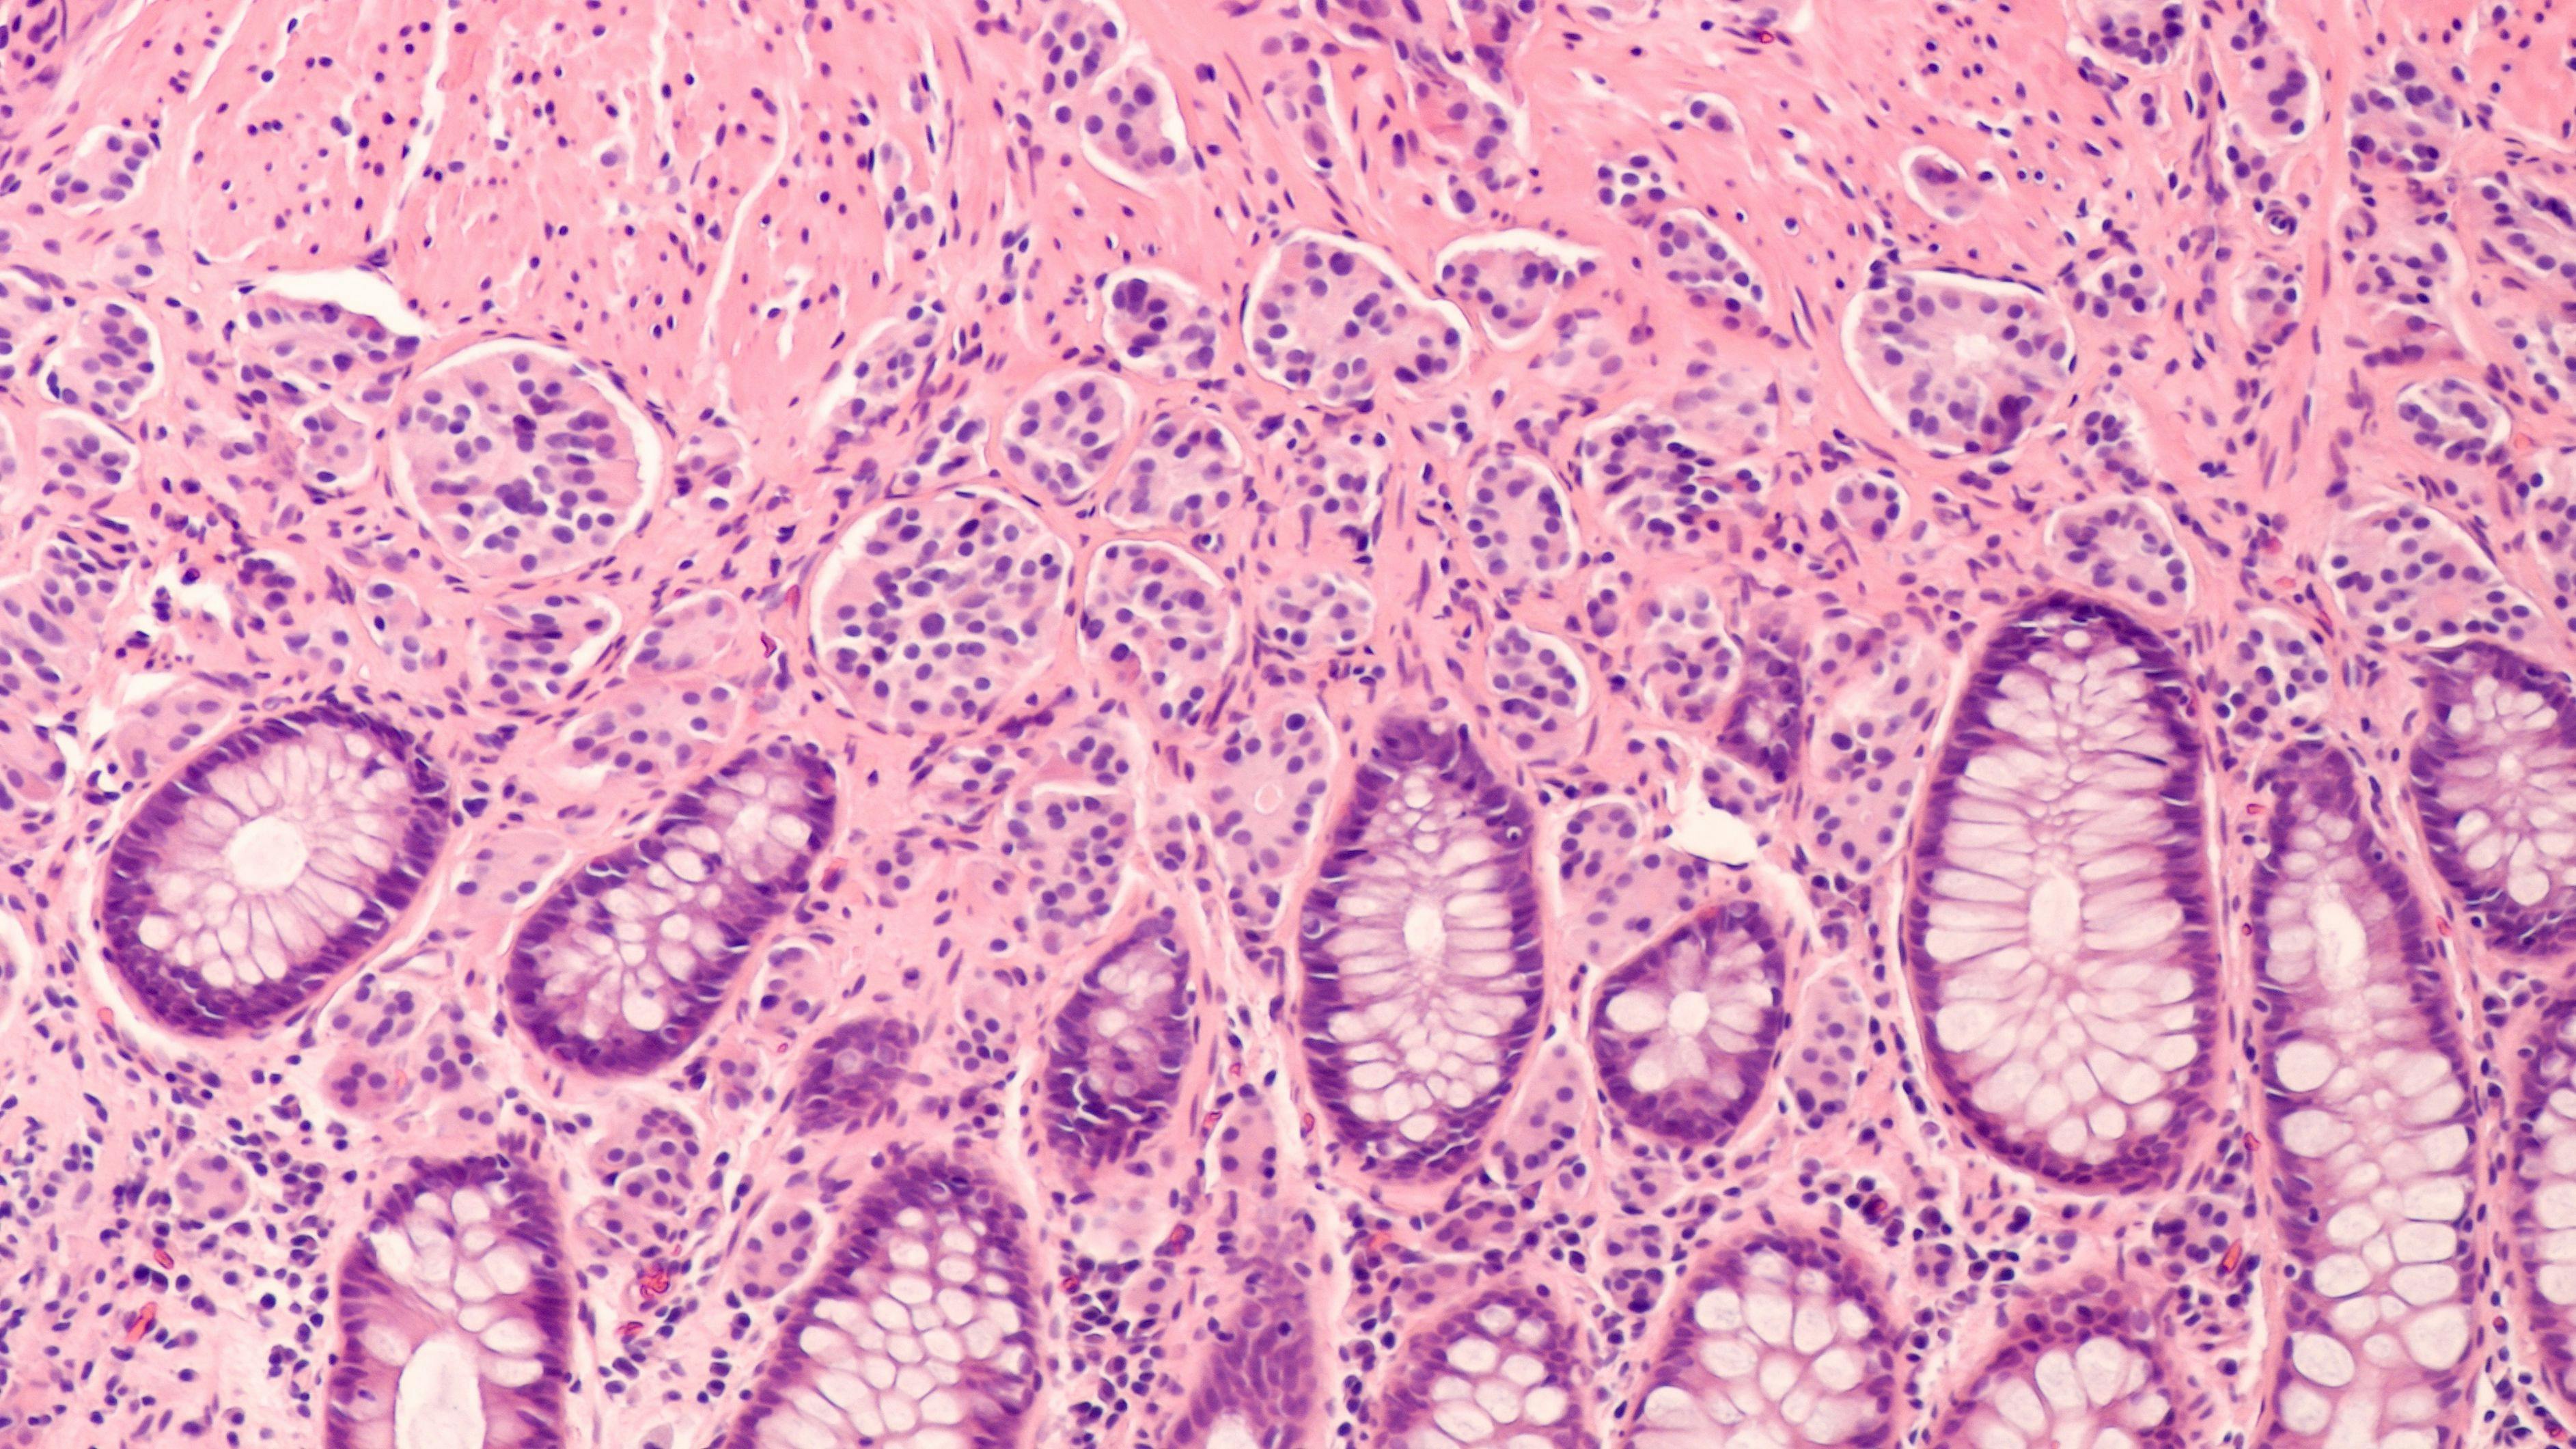 Photomicrograph of a carcinoid tumor, a type of neuroendocrine tumor (NET), which presented as a colon polyp during routine colonoscopy. Spread to liver can cause symptoms of carcinoid syndrome. | Image Credit: © David A Litman - www.stock.adobe.com